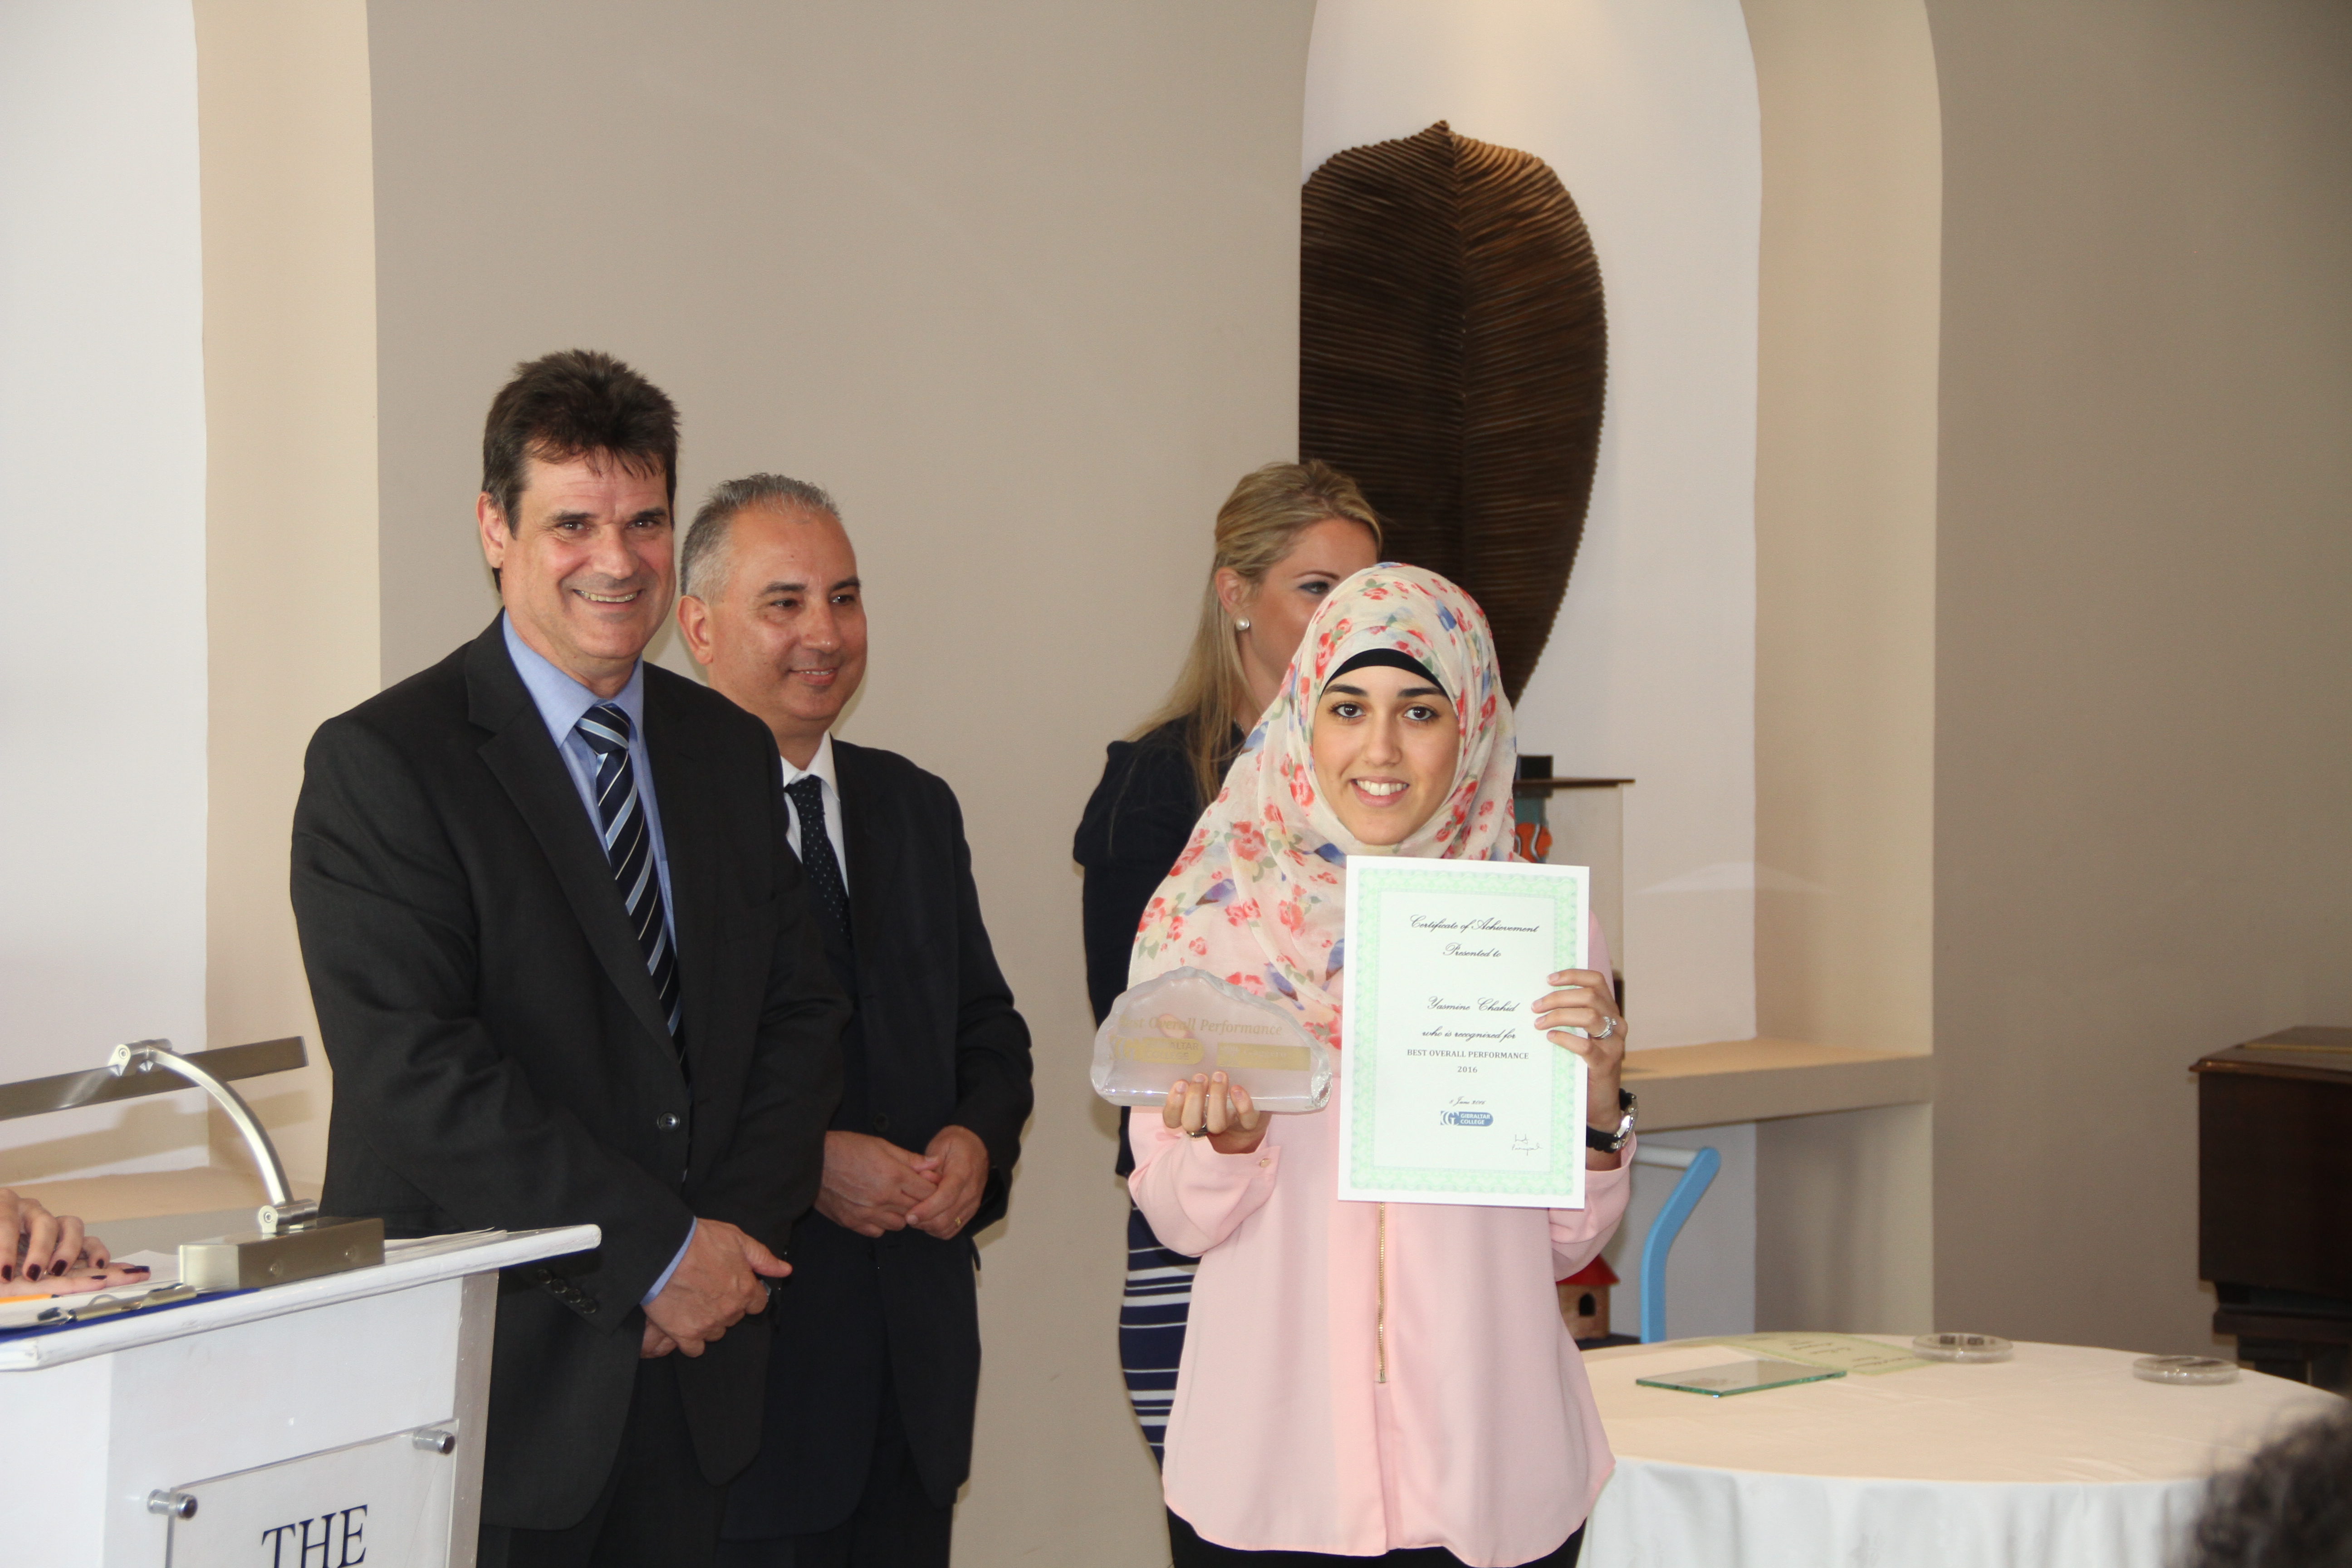 Yasmine Chahid received the award for best overall performance